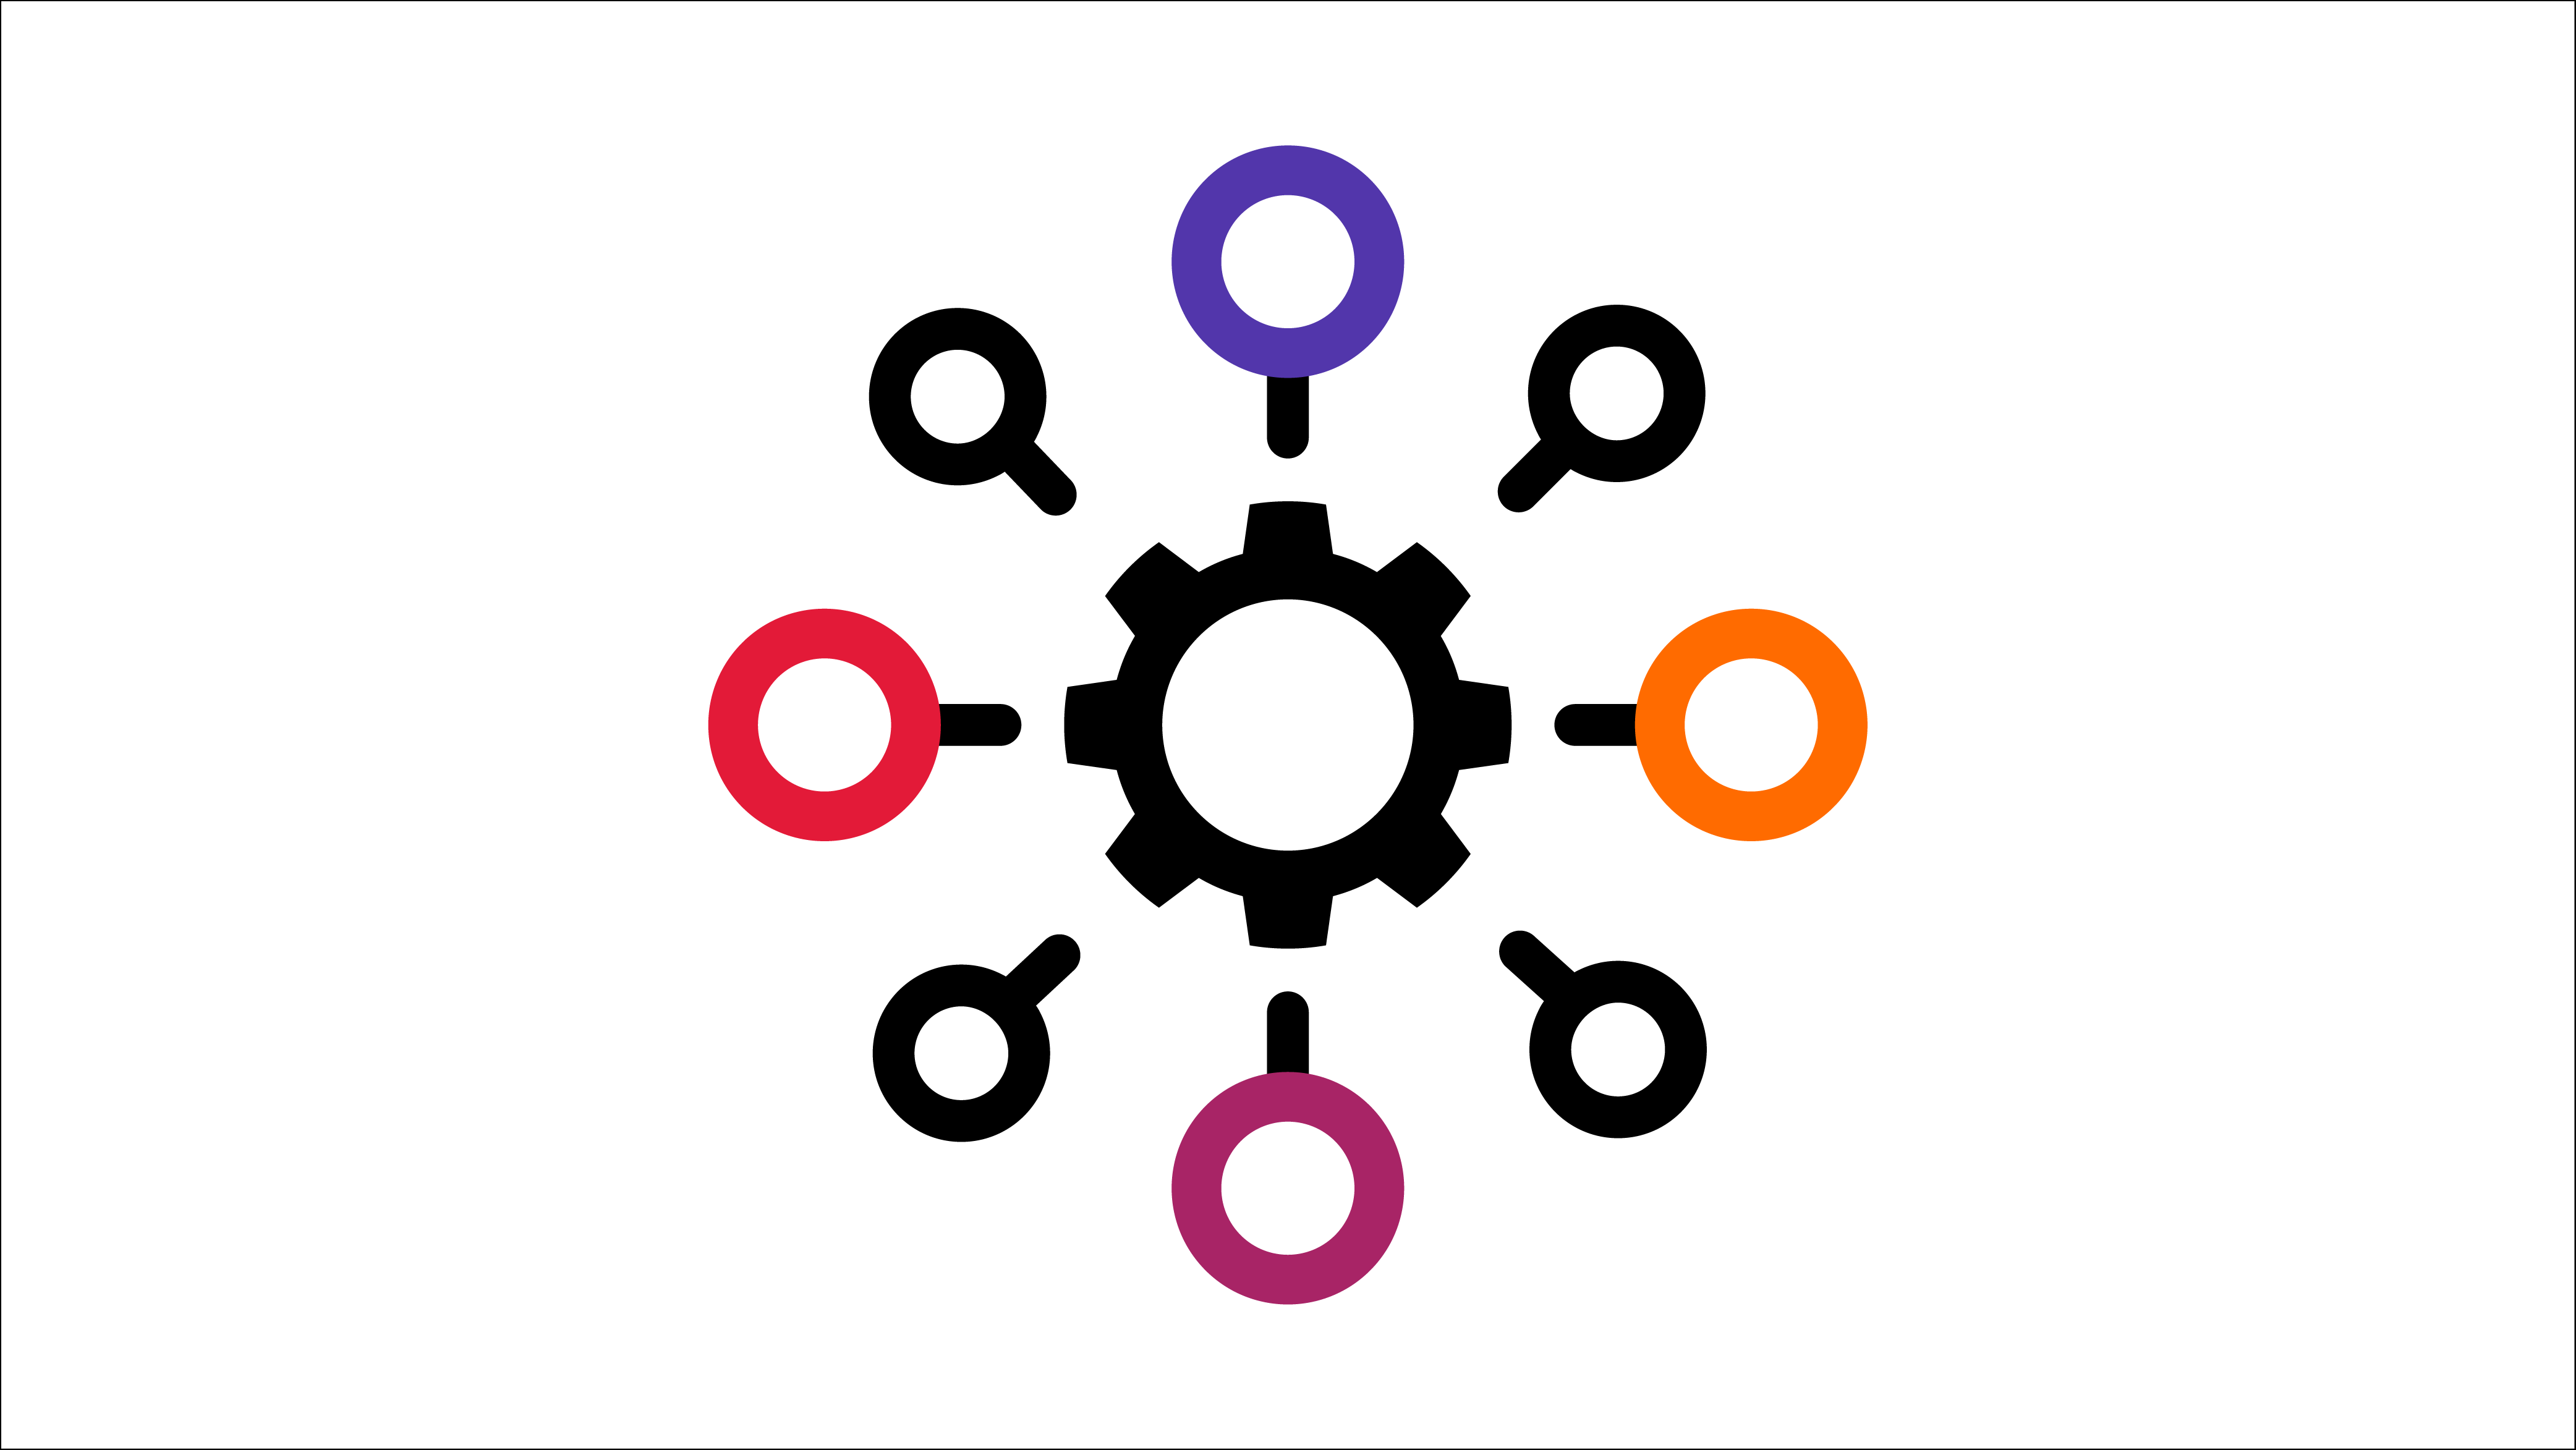 gear cog surround by 8 circular nodes connected with lines